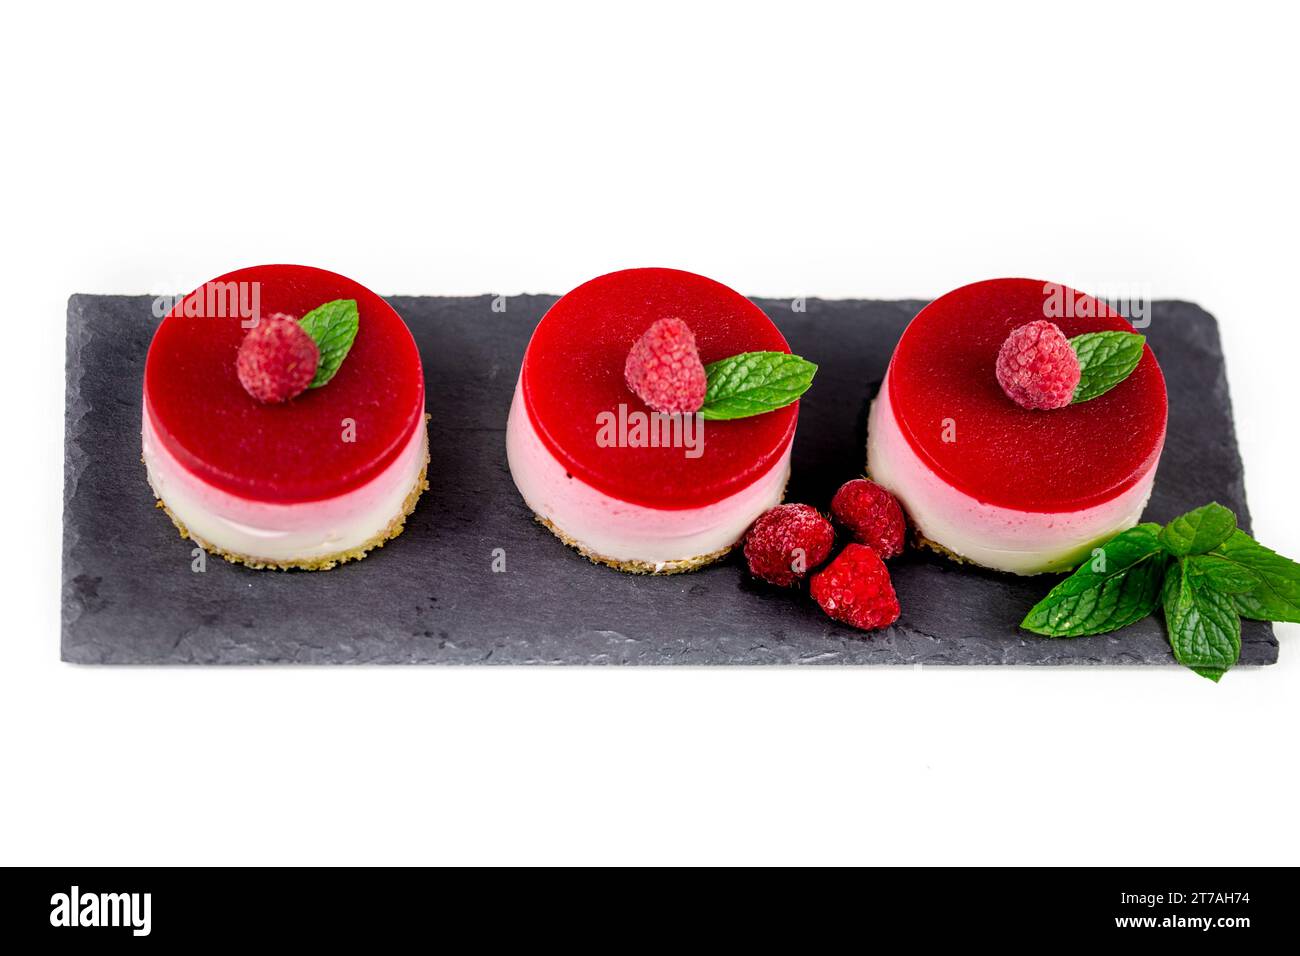 A delicious raspberry cheesecake with fresh raspberries and mint leaves on a black slate plate. Stock Photo